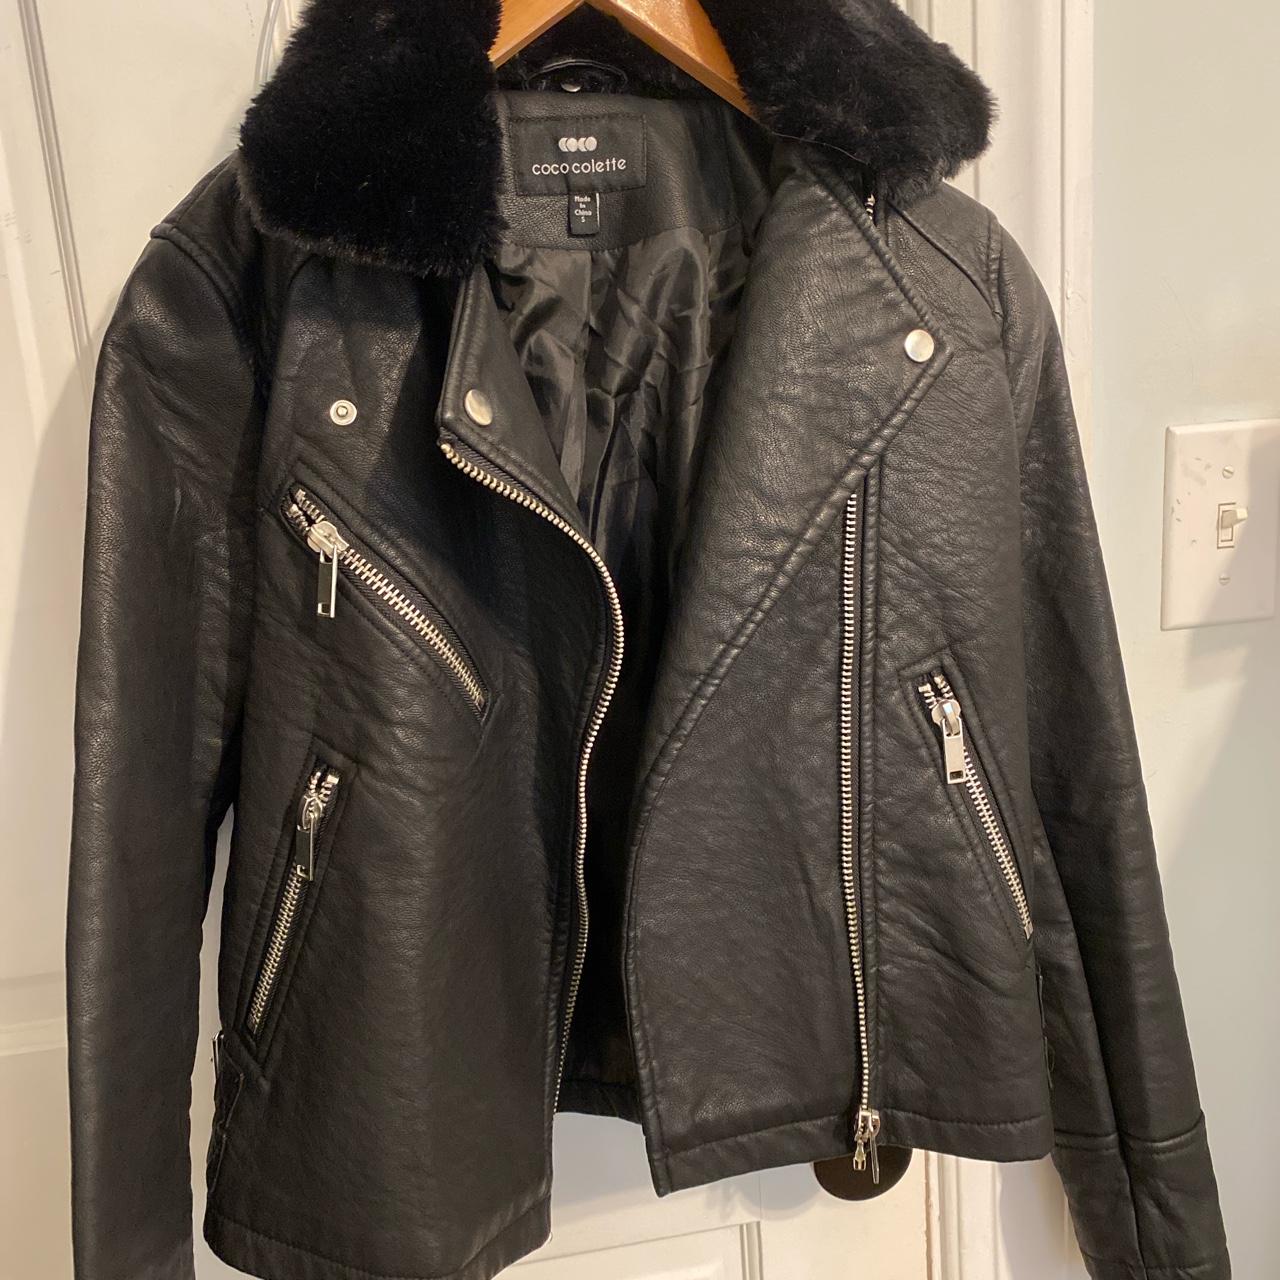 Never worn coco Colette leather jacket. Not sure if... - Depop